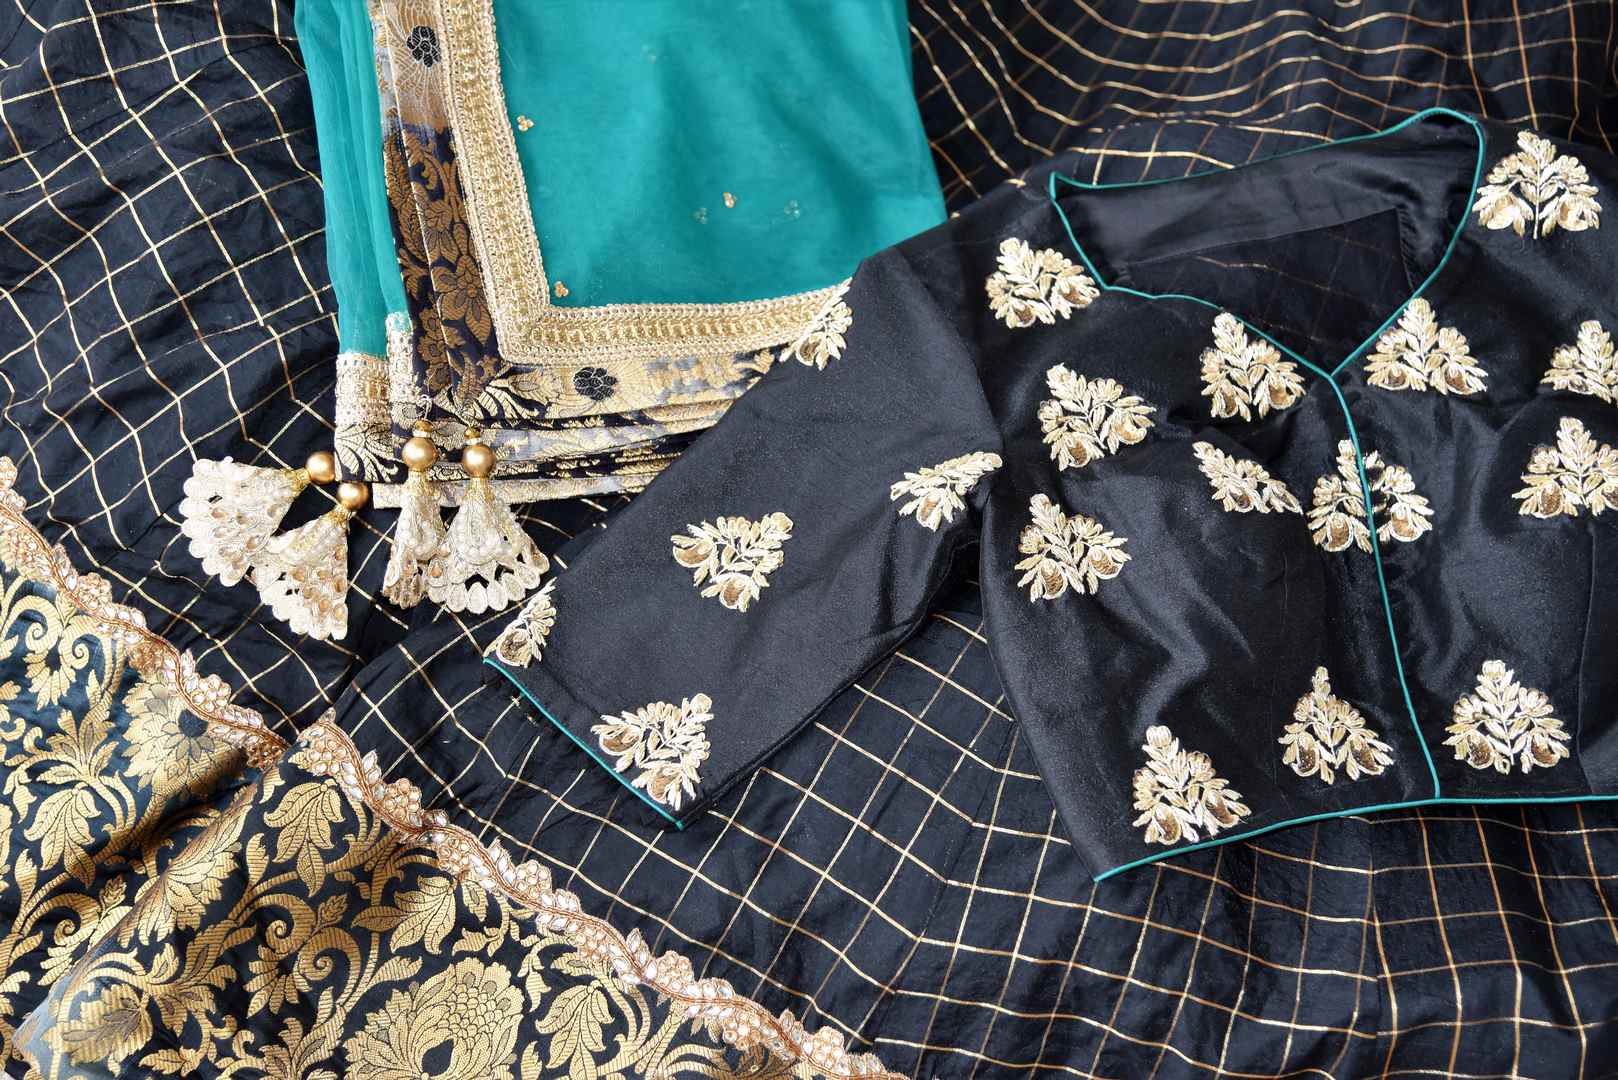 Heavily ornamented royal blue silk lehenga with checkered details and banarsi border comes with a gorgeous blue and beige silk embroidered blouse. Let the teal sequinned net dupatta fall immaculately for the feminine look. Shop designer sarees, lehenga cholis, Indian dresses online or visit Pure Elegance store, USA. -details